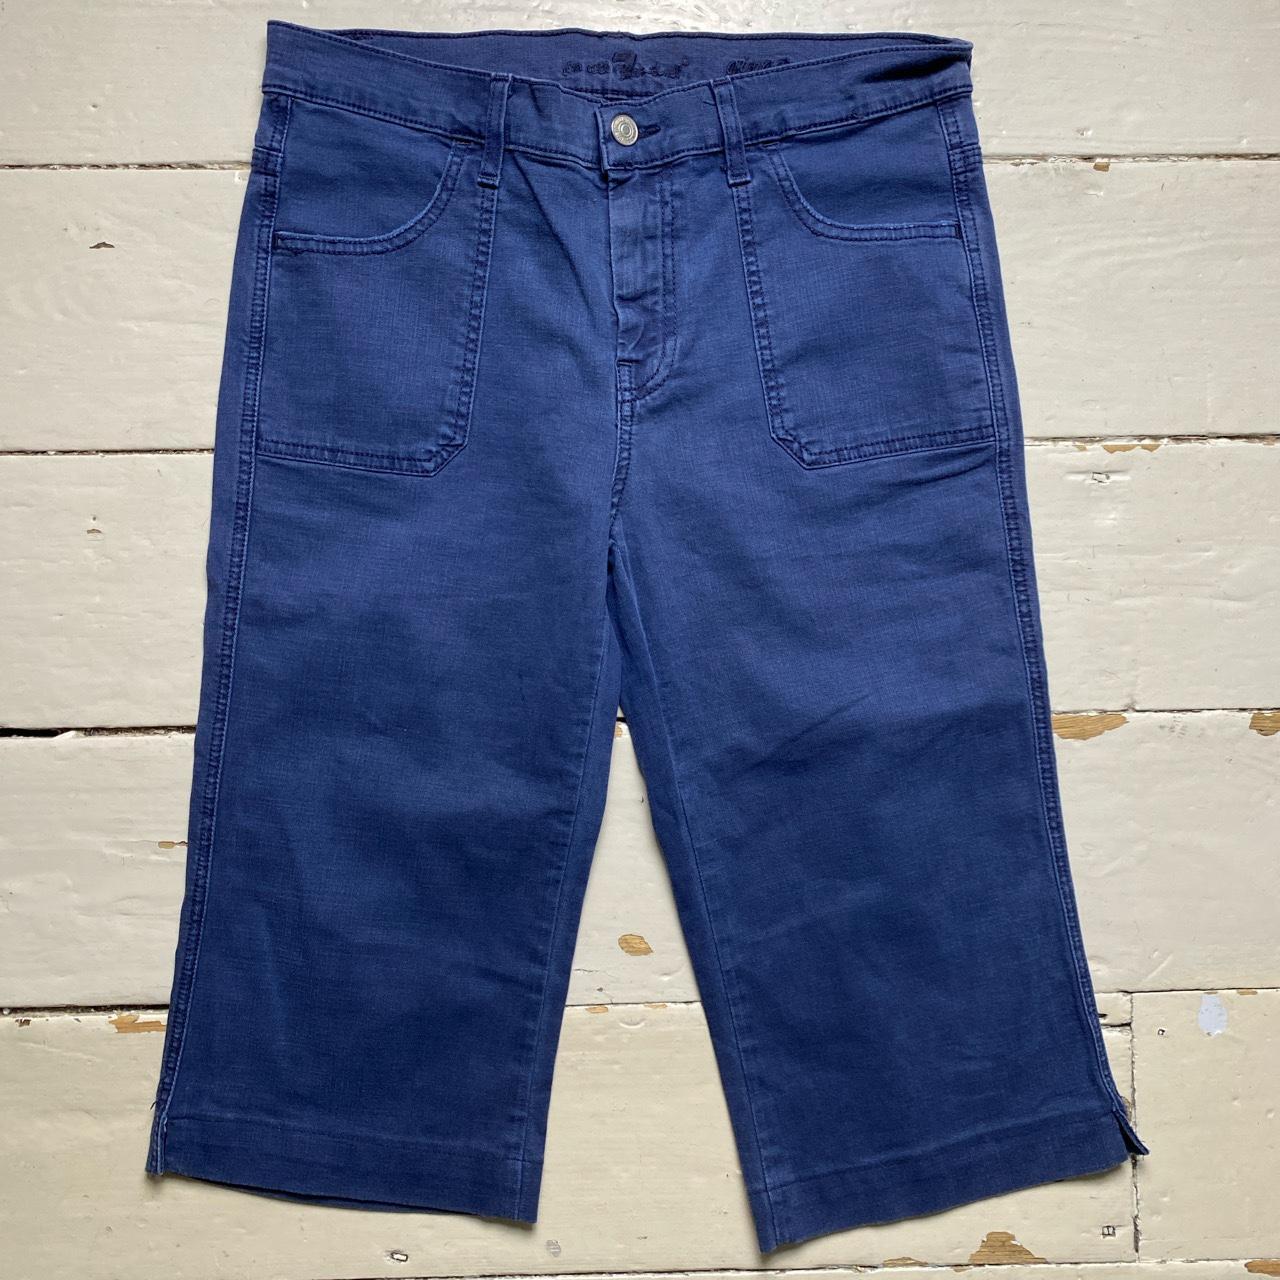 7 For All Mankind Navy Short Jean Jorts